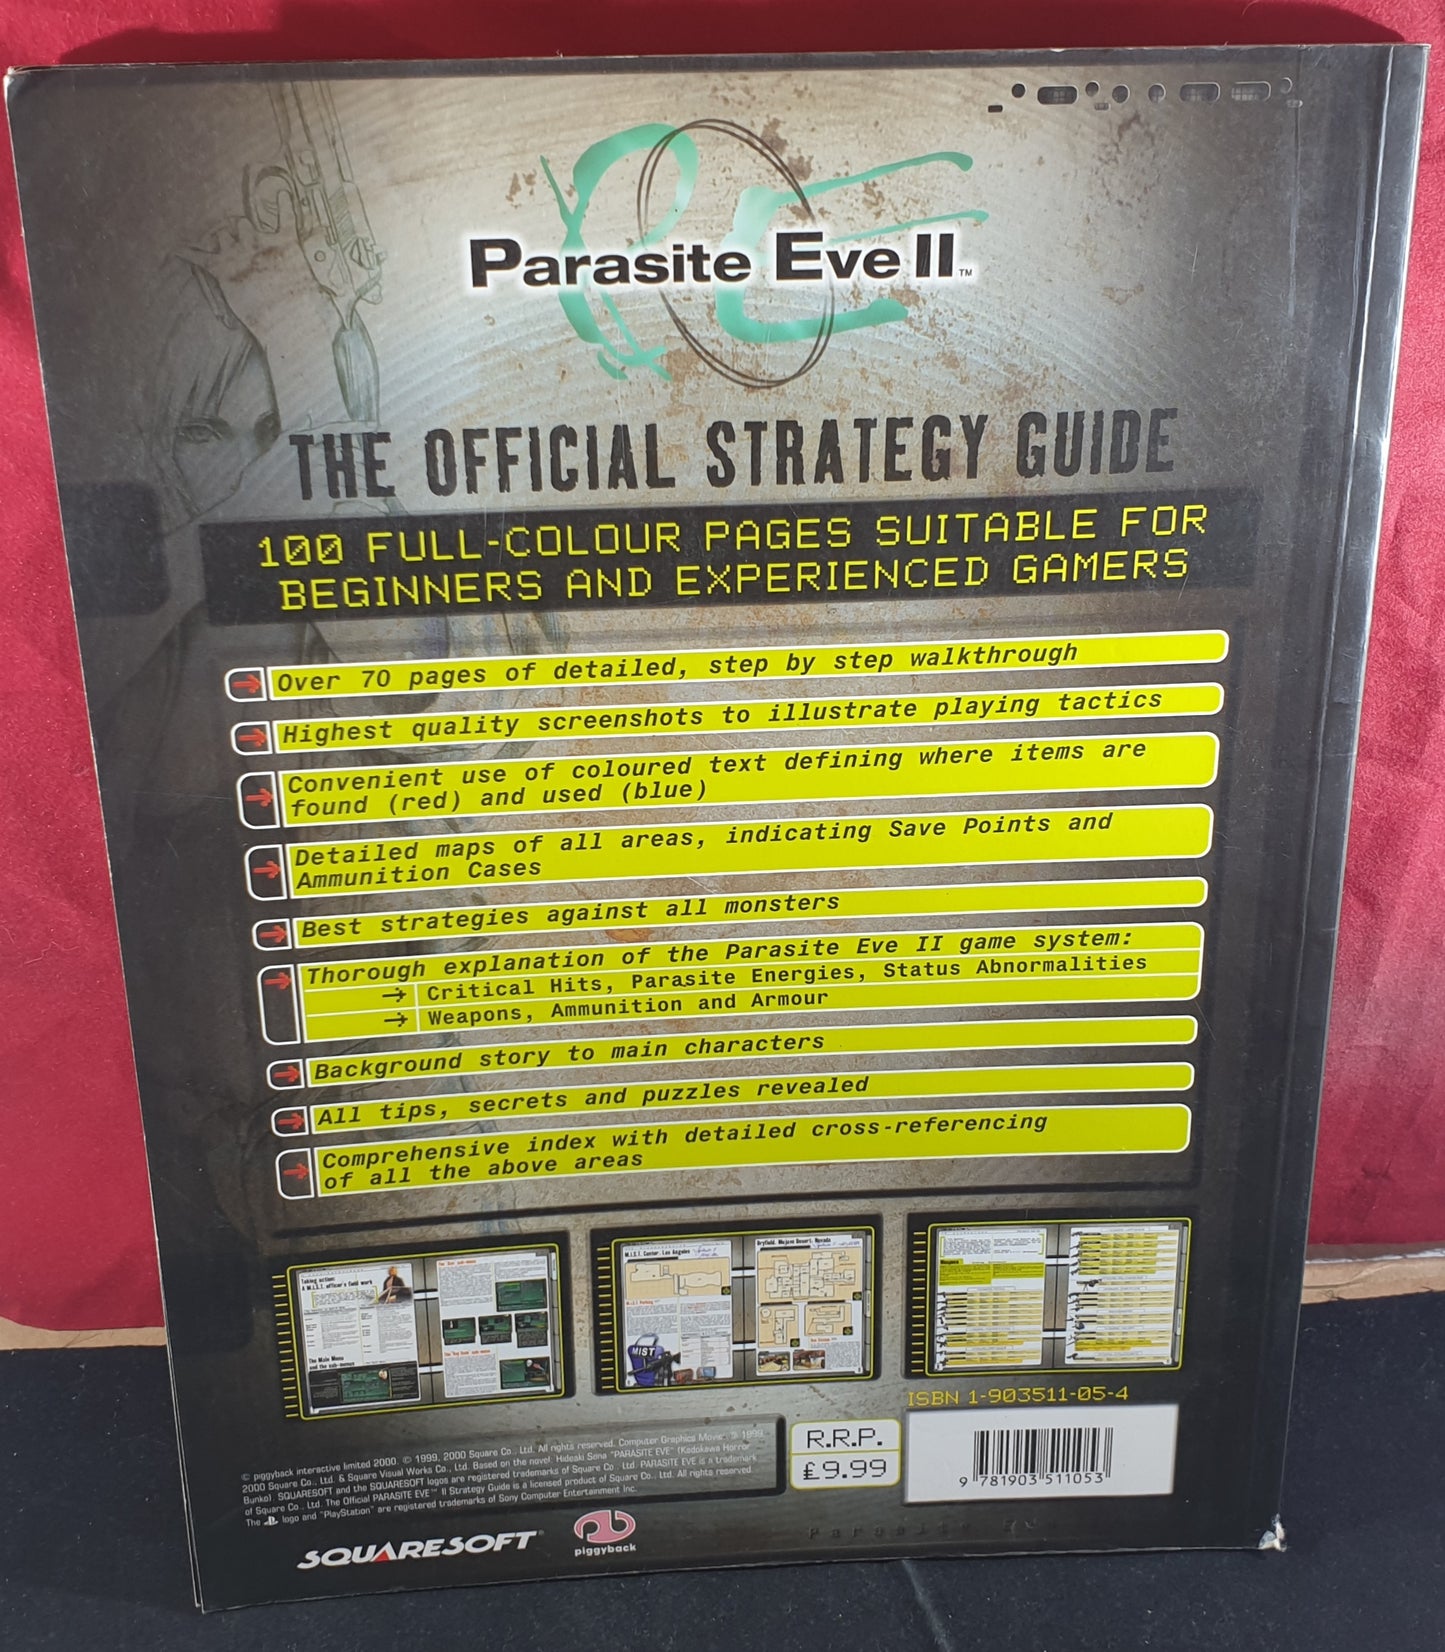 Parasite Eve II Strategy Guide Book